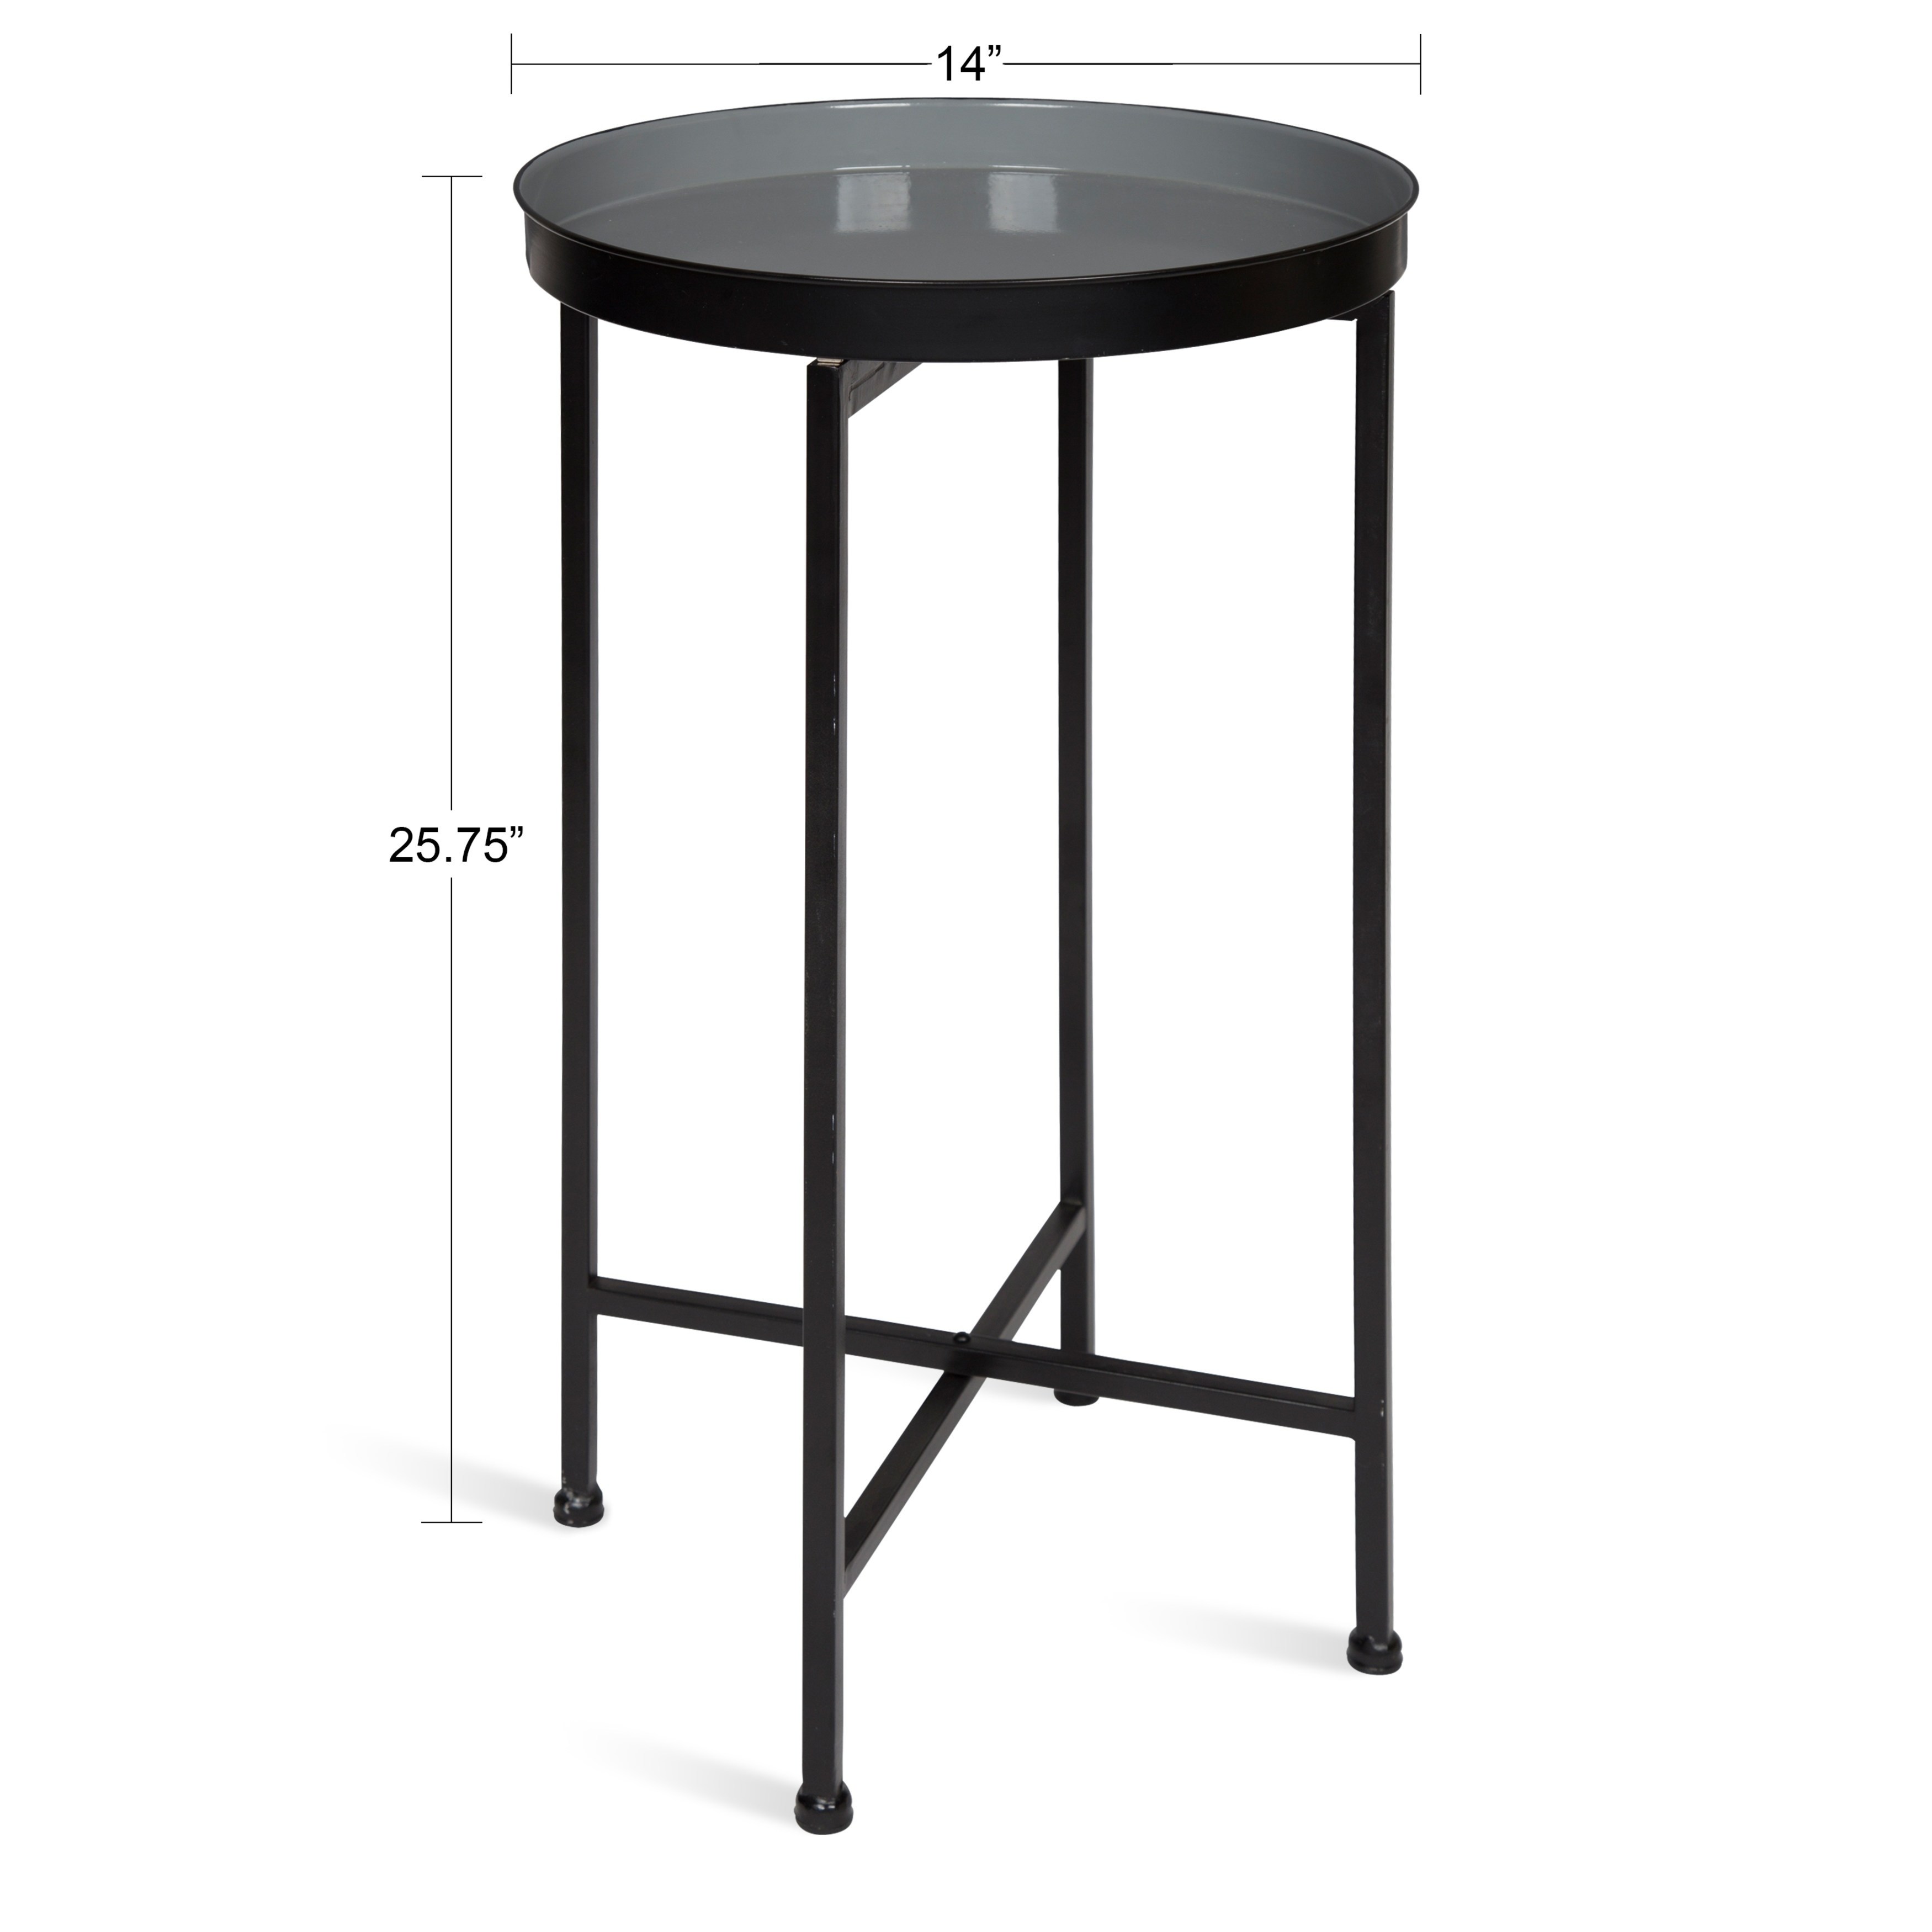 kate and laurel celia round foldable tray accent table free metal shipping today brass lamp end with attached door cabinet french chairs console furniture small black bedside tile